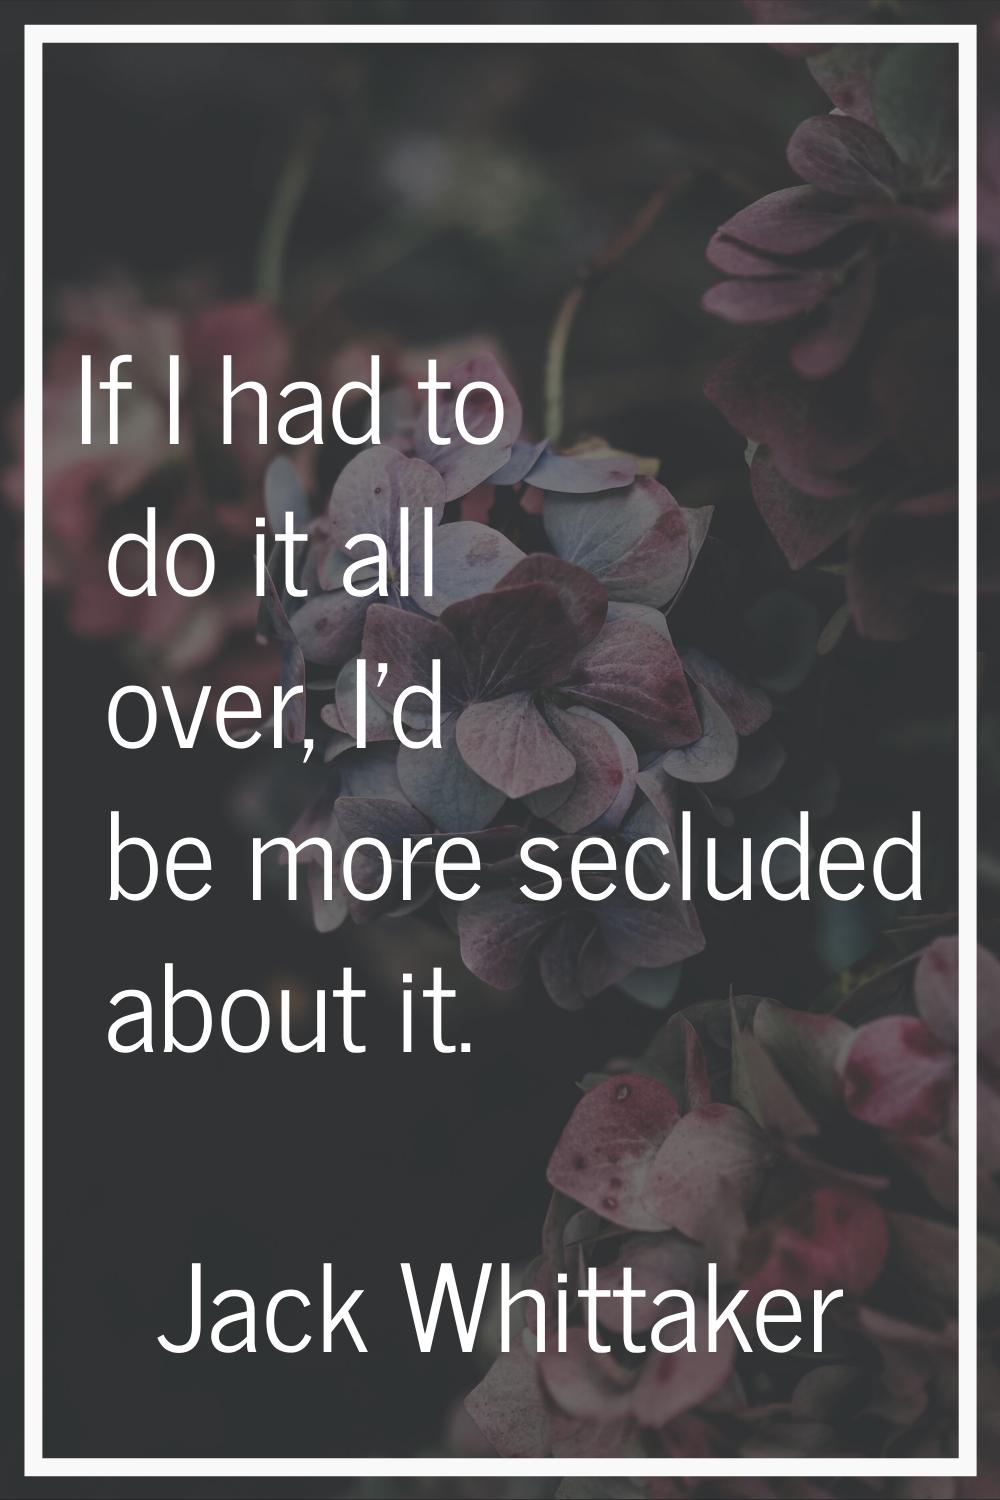 If I had to do it all over, I'd be more secluded about it.